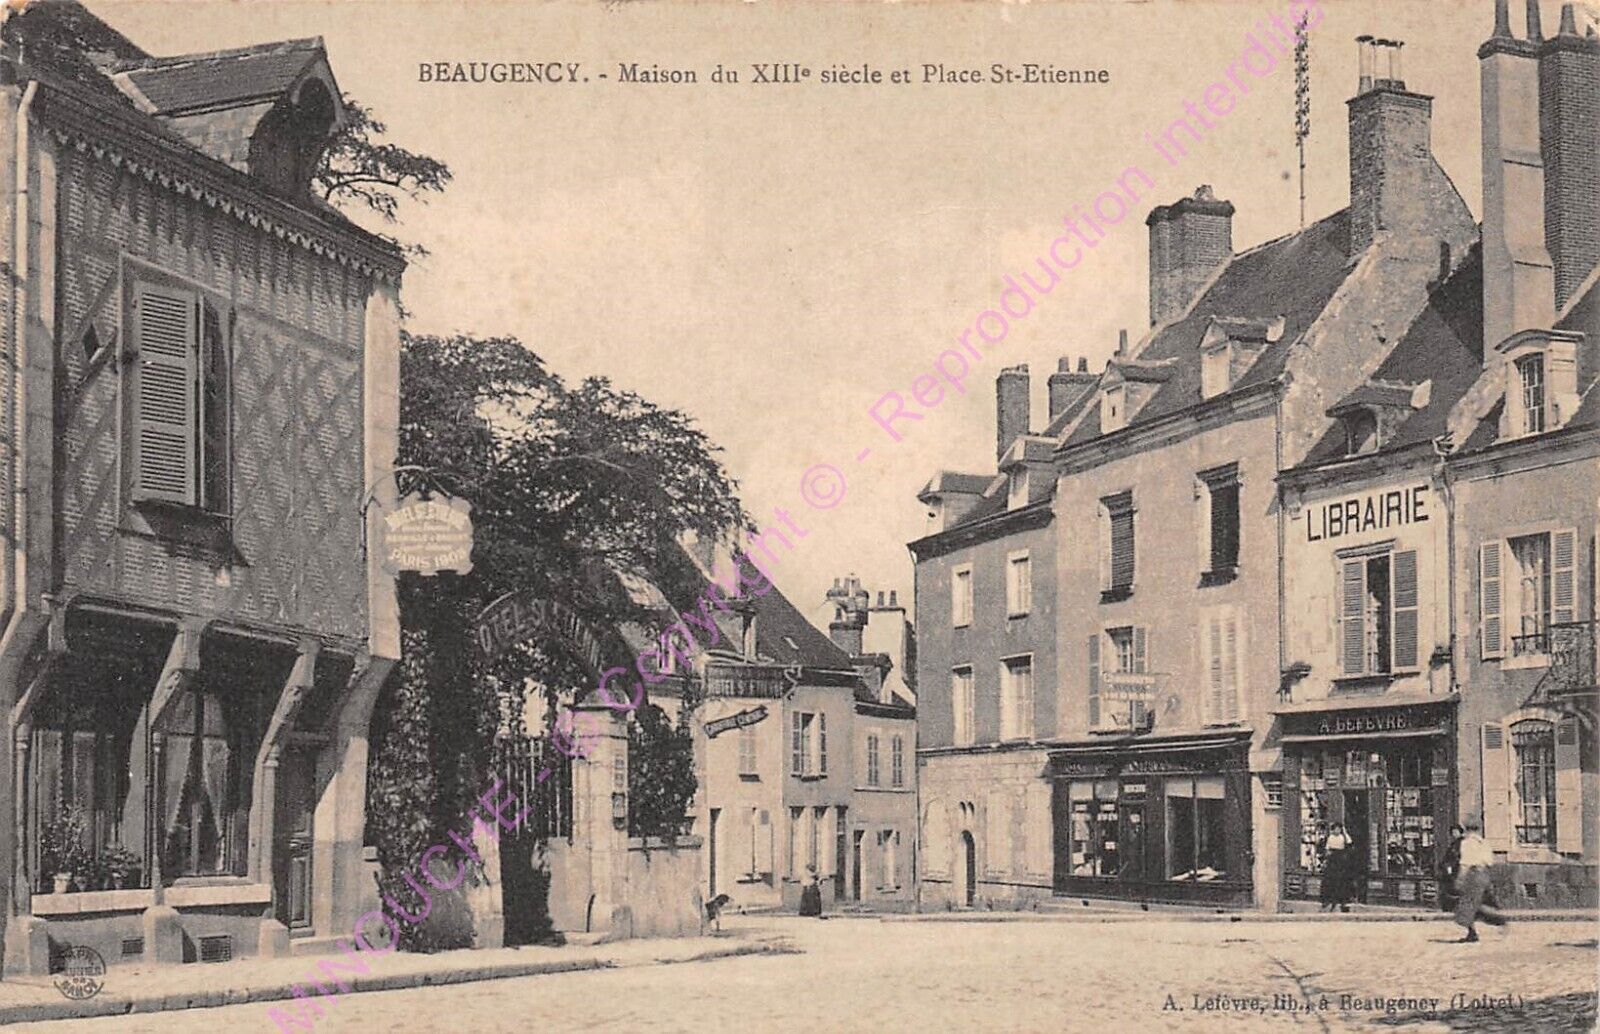 CPA 45190 Beaugency Home XIII Century Place st Etienne Bookstore Lefevre 1913